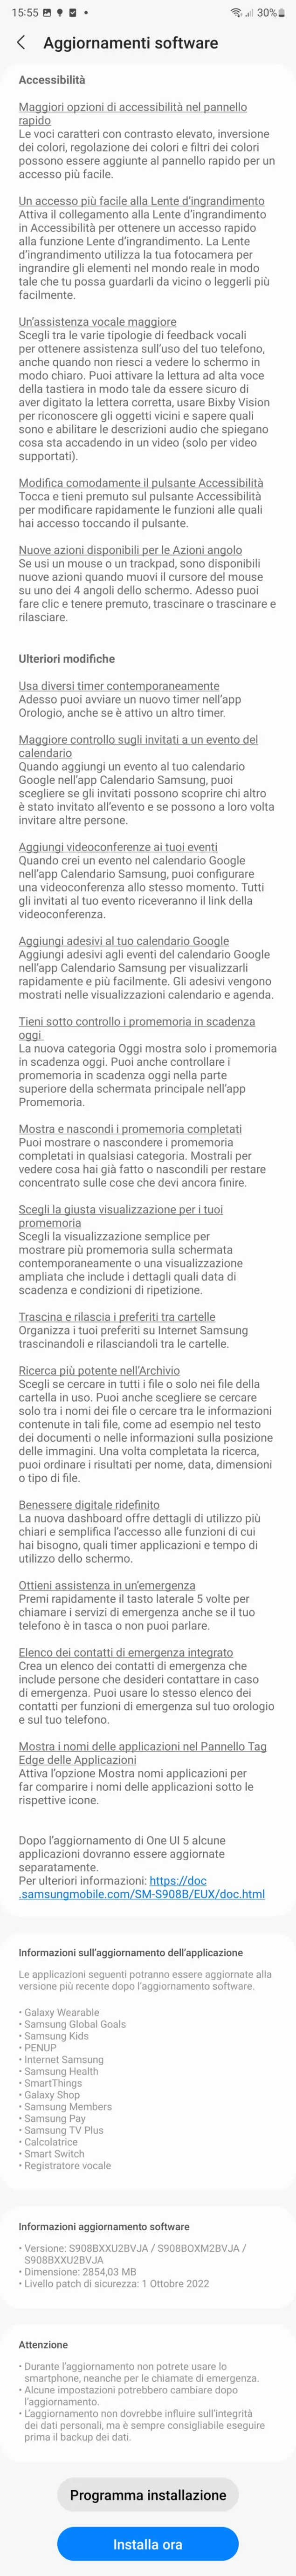 One UI 5.0 changelog (image via Tutto Android)